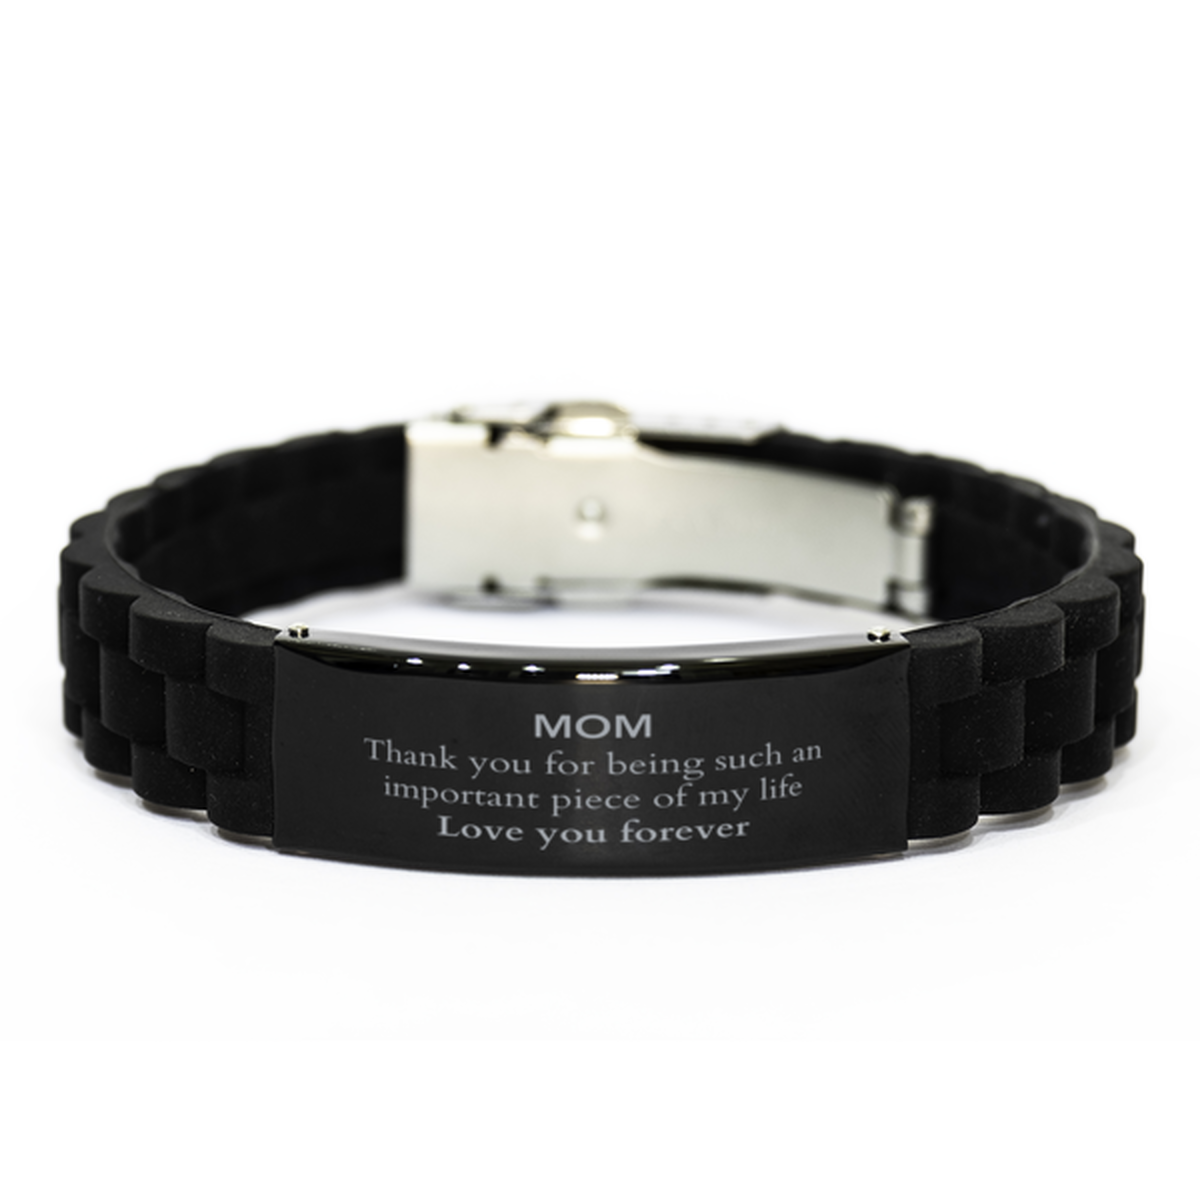 Appropriate Mom Black Glidelock Clasp Bracelet Epic Birthday Gifts for Mom Thank you for being such an important piece of my life Mom Christmas Mothers Fathers Day